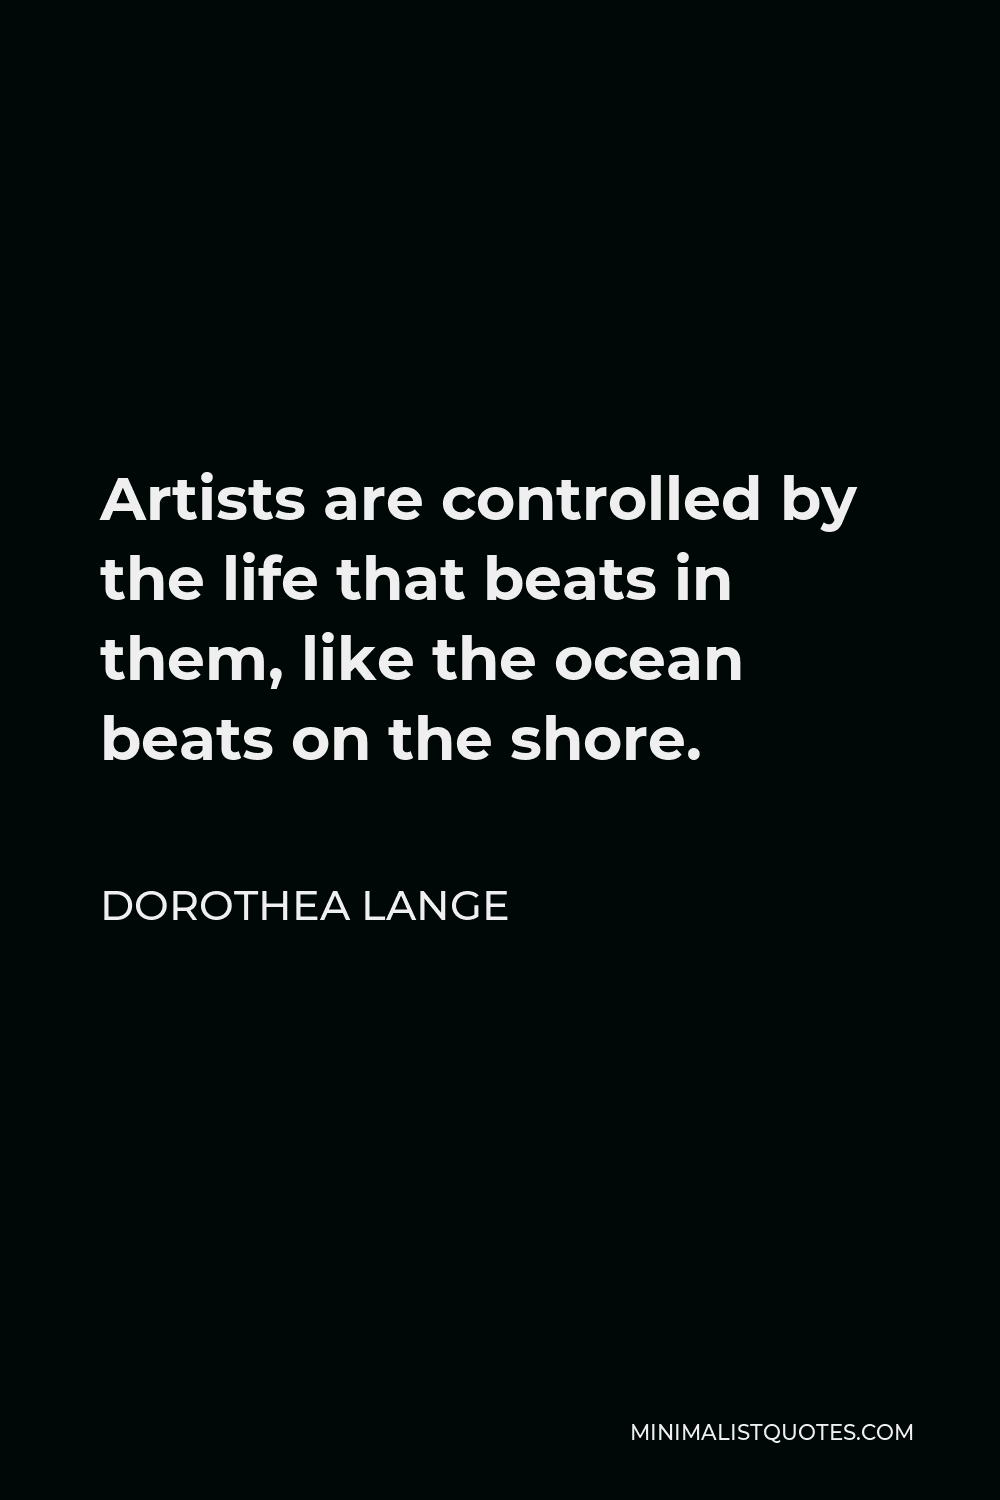 Dorothea Lange Quote - Artists are controlled by the life that beats in them, like the ocean beats on the shore.